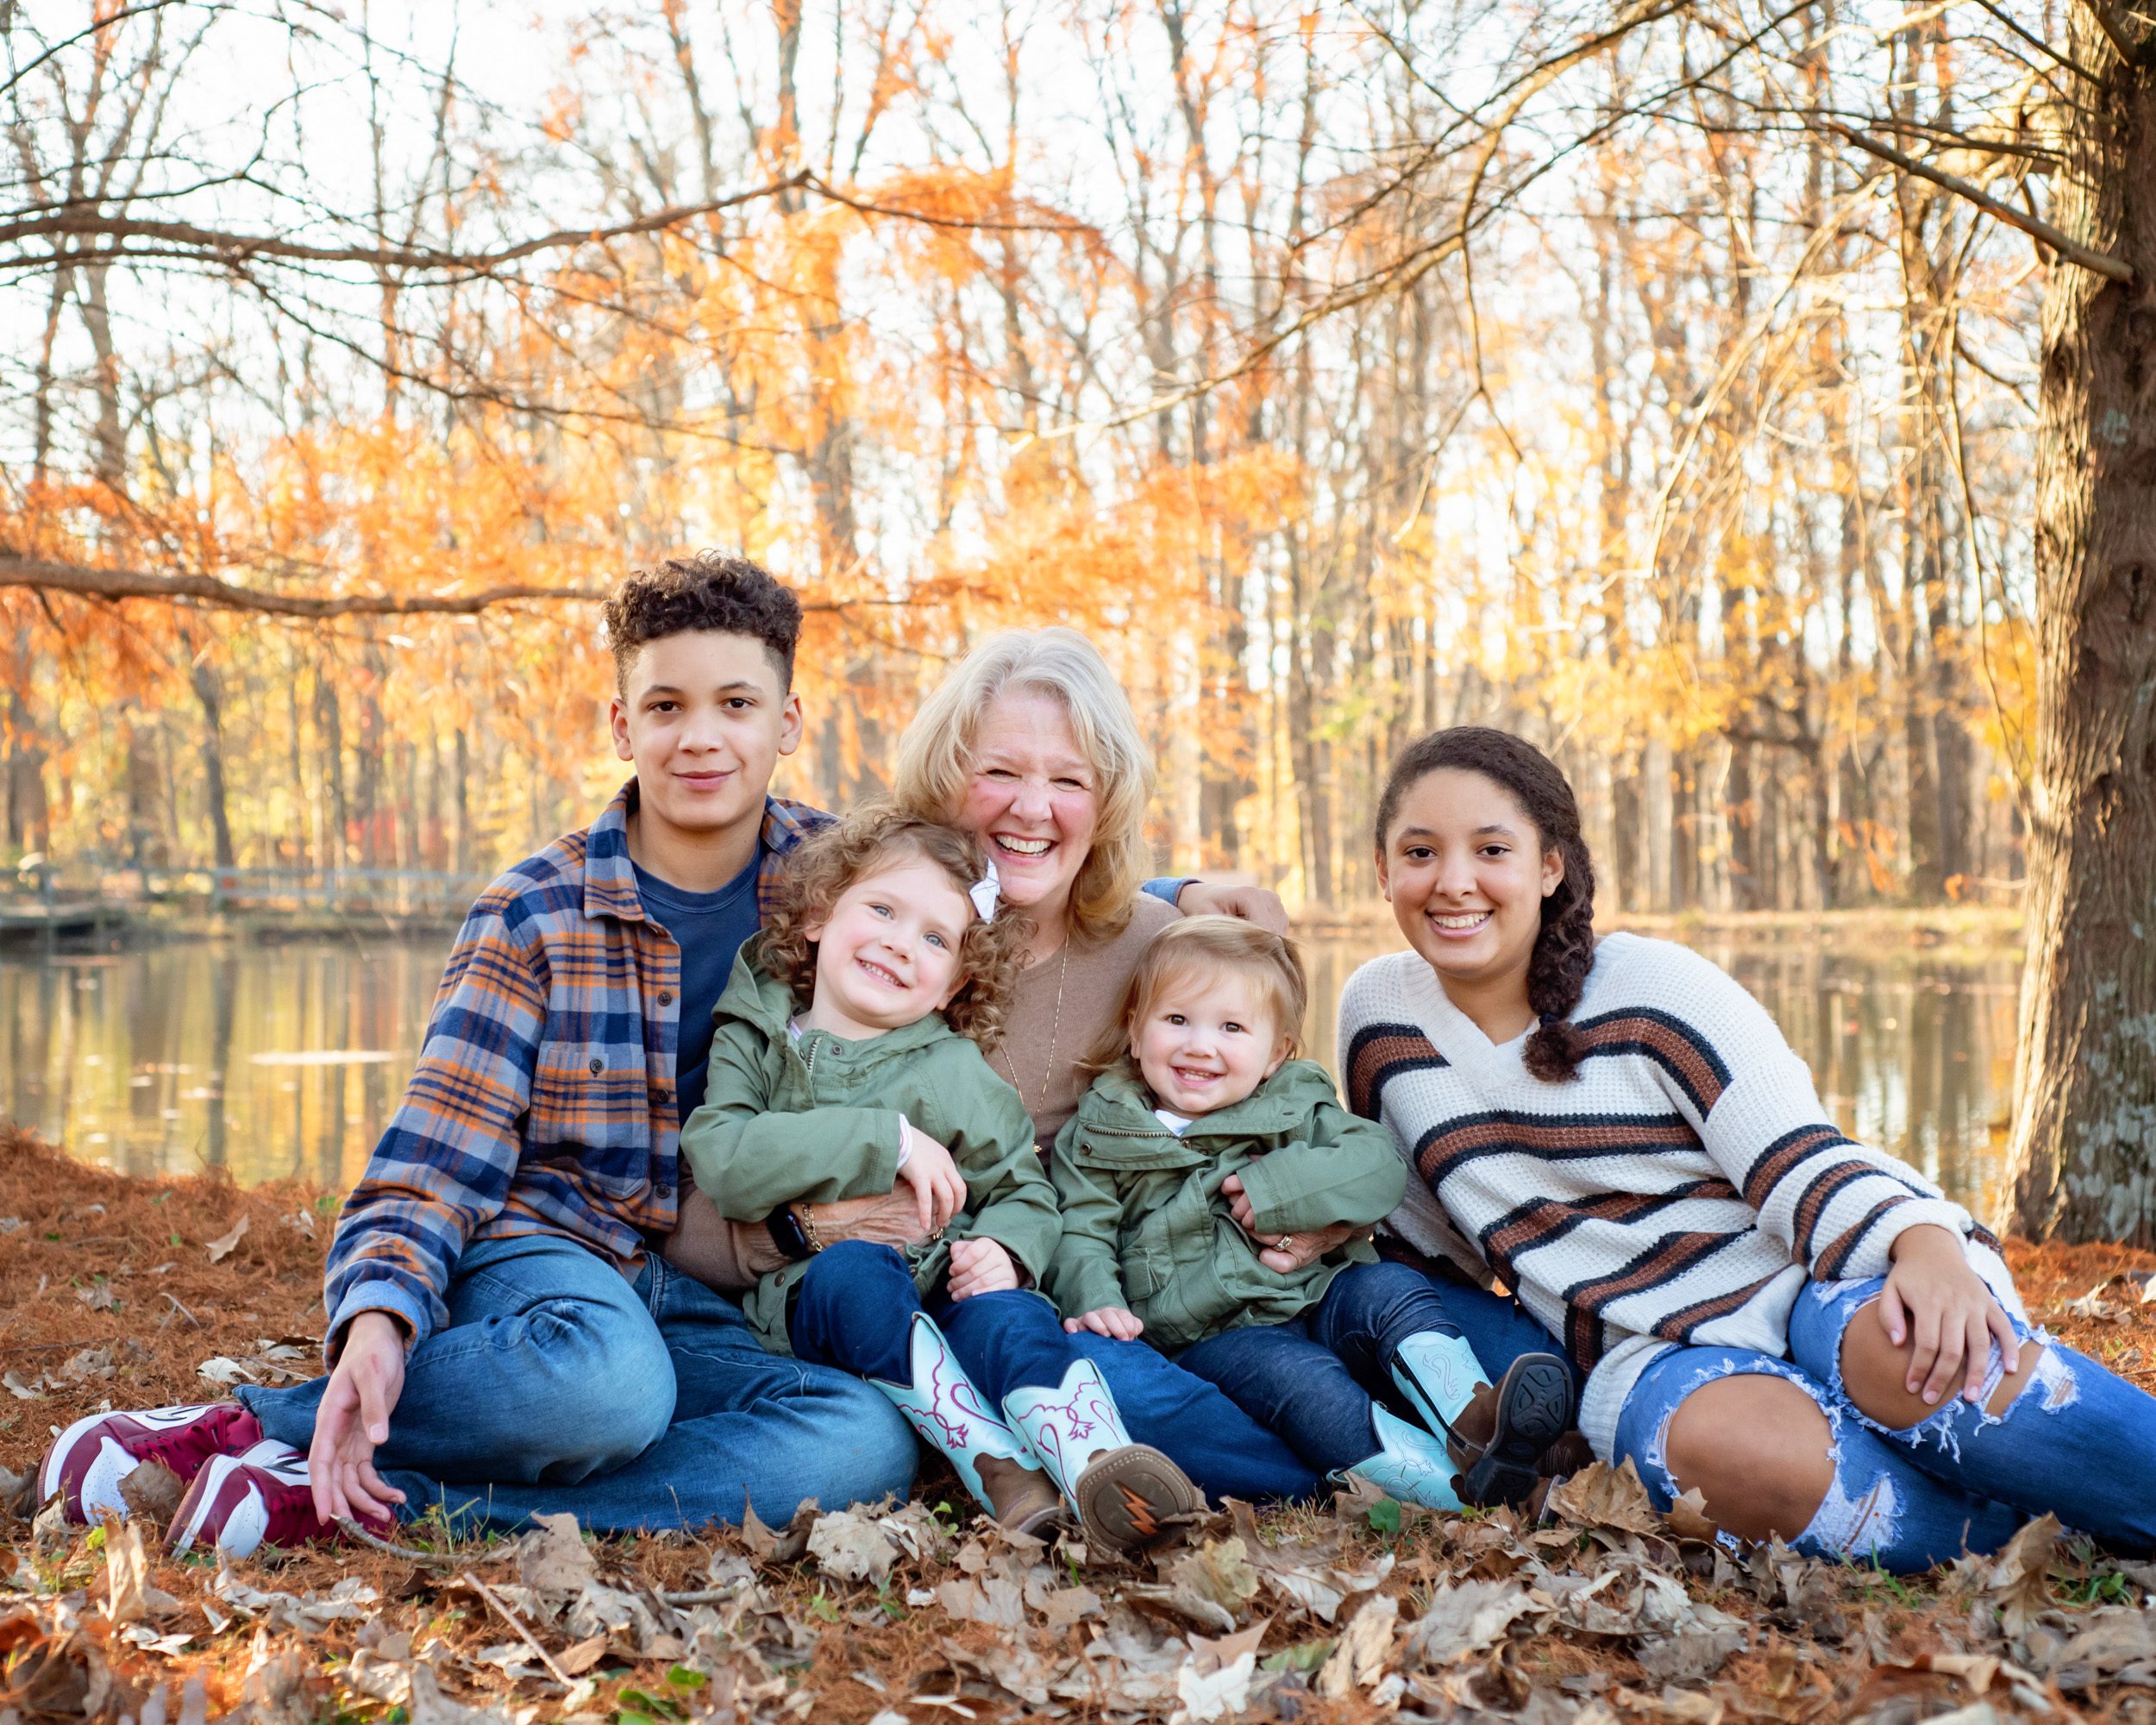 A grandmother sitting in the leaves in front of a pond and snuggling with her four grandkids during an extended family photoshoot